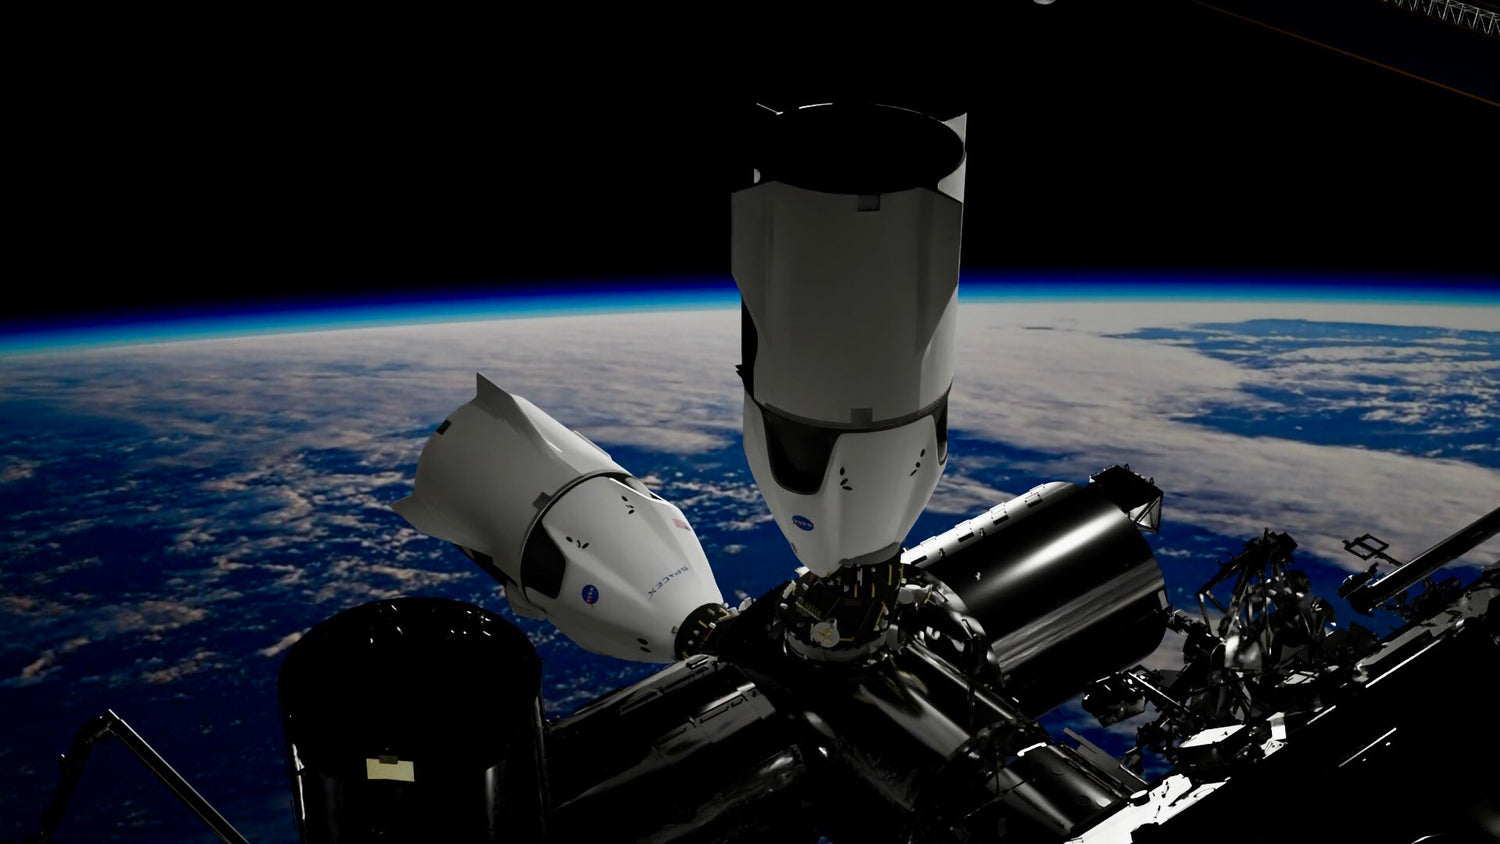 Science cargo aboard SpaceX Dragon will be returned to researchers faster than before